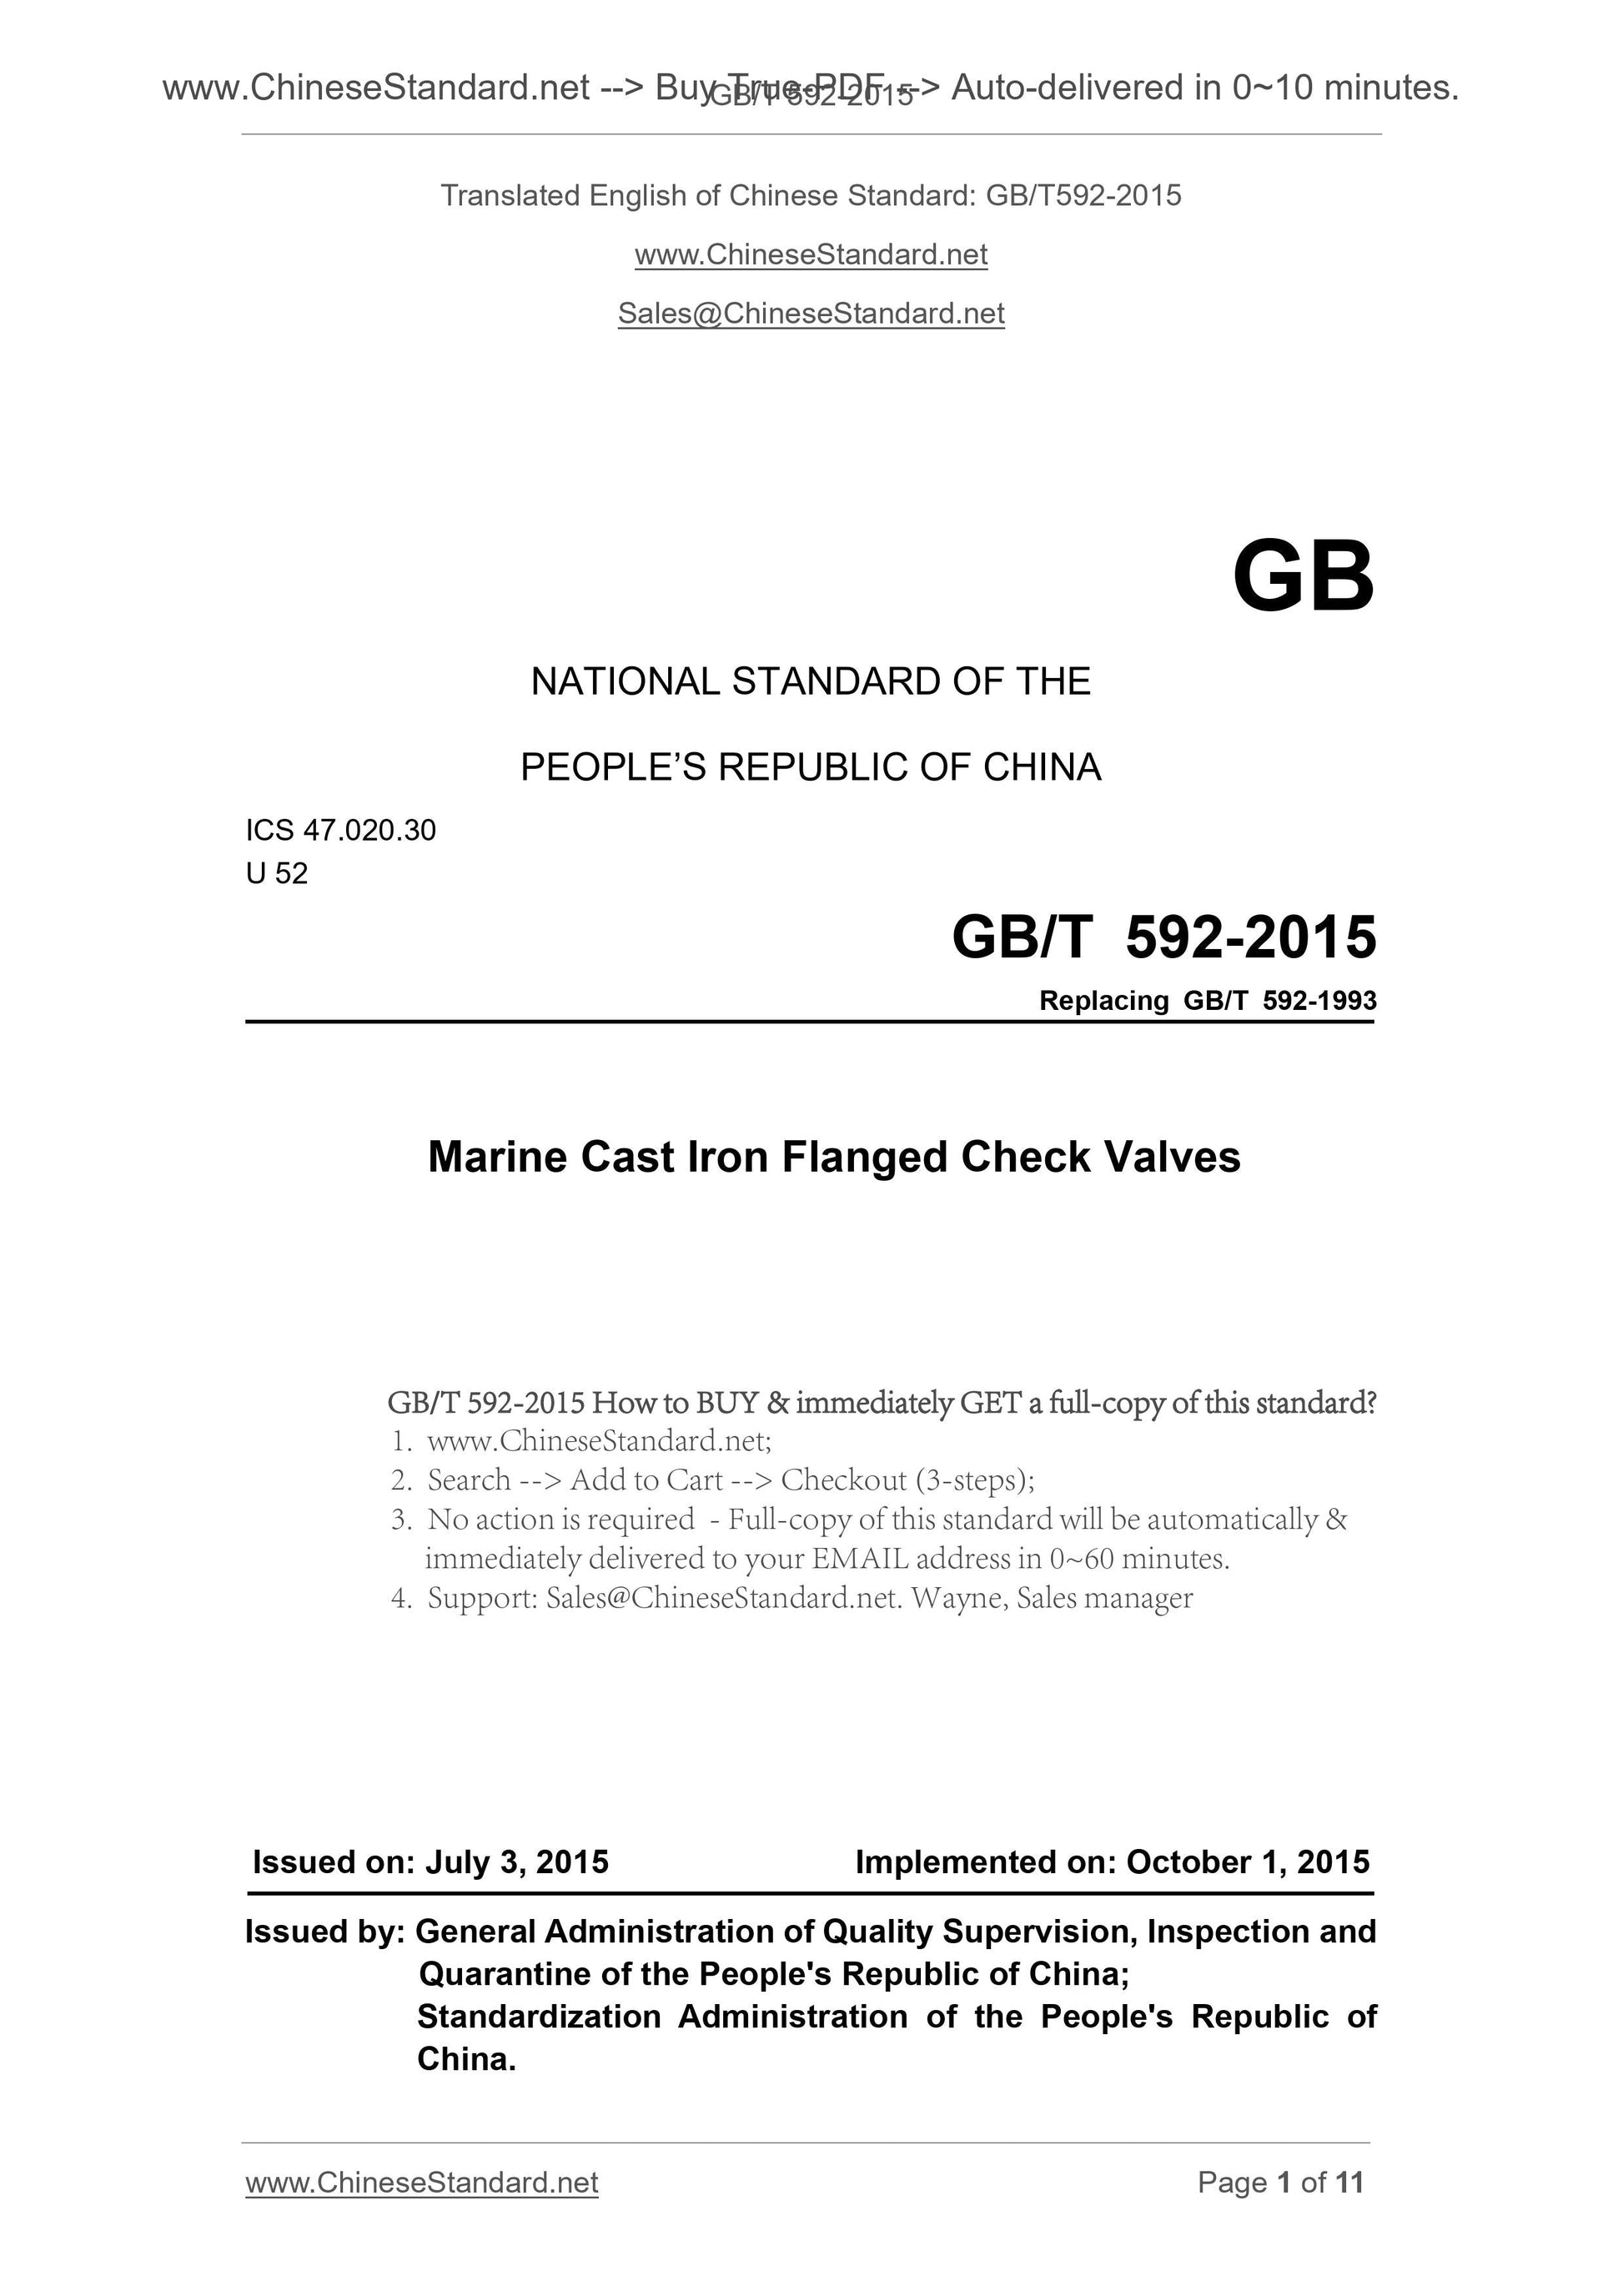 GB/T 592-2015 Page 1